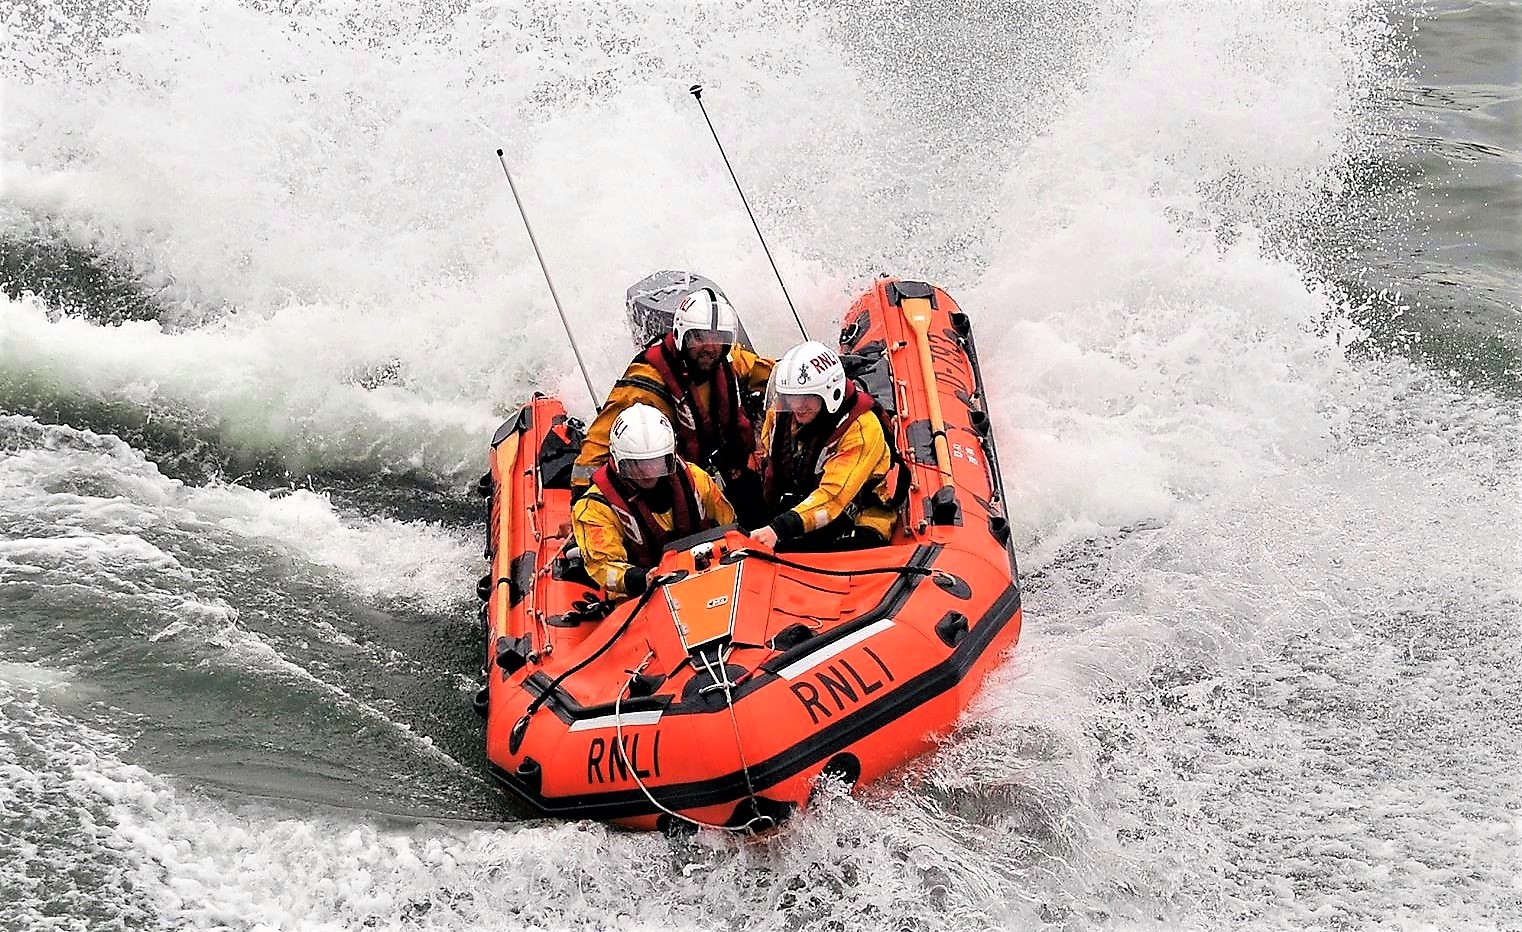  Mr Finch-Saunders is a member of the D-class inshore lifeboat crew, which operates close to the shore and cliffs.